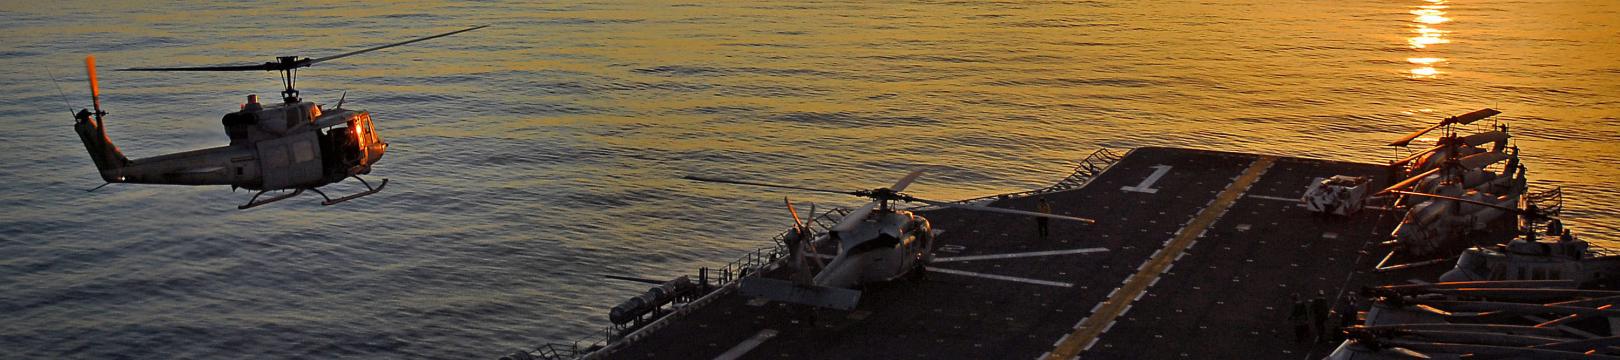 Helicopter taking off from the flight deck